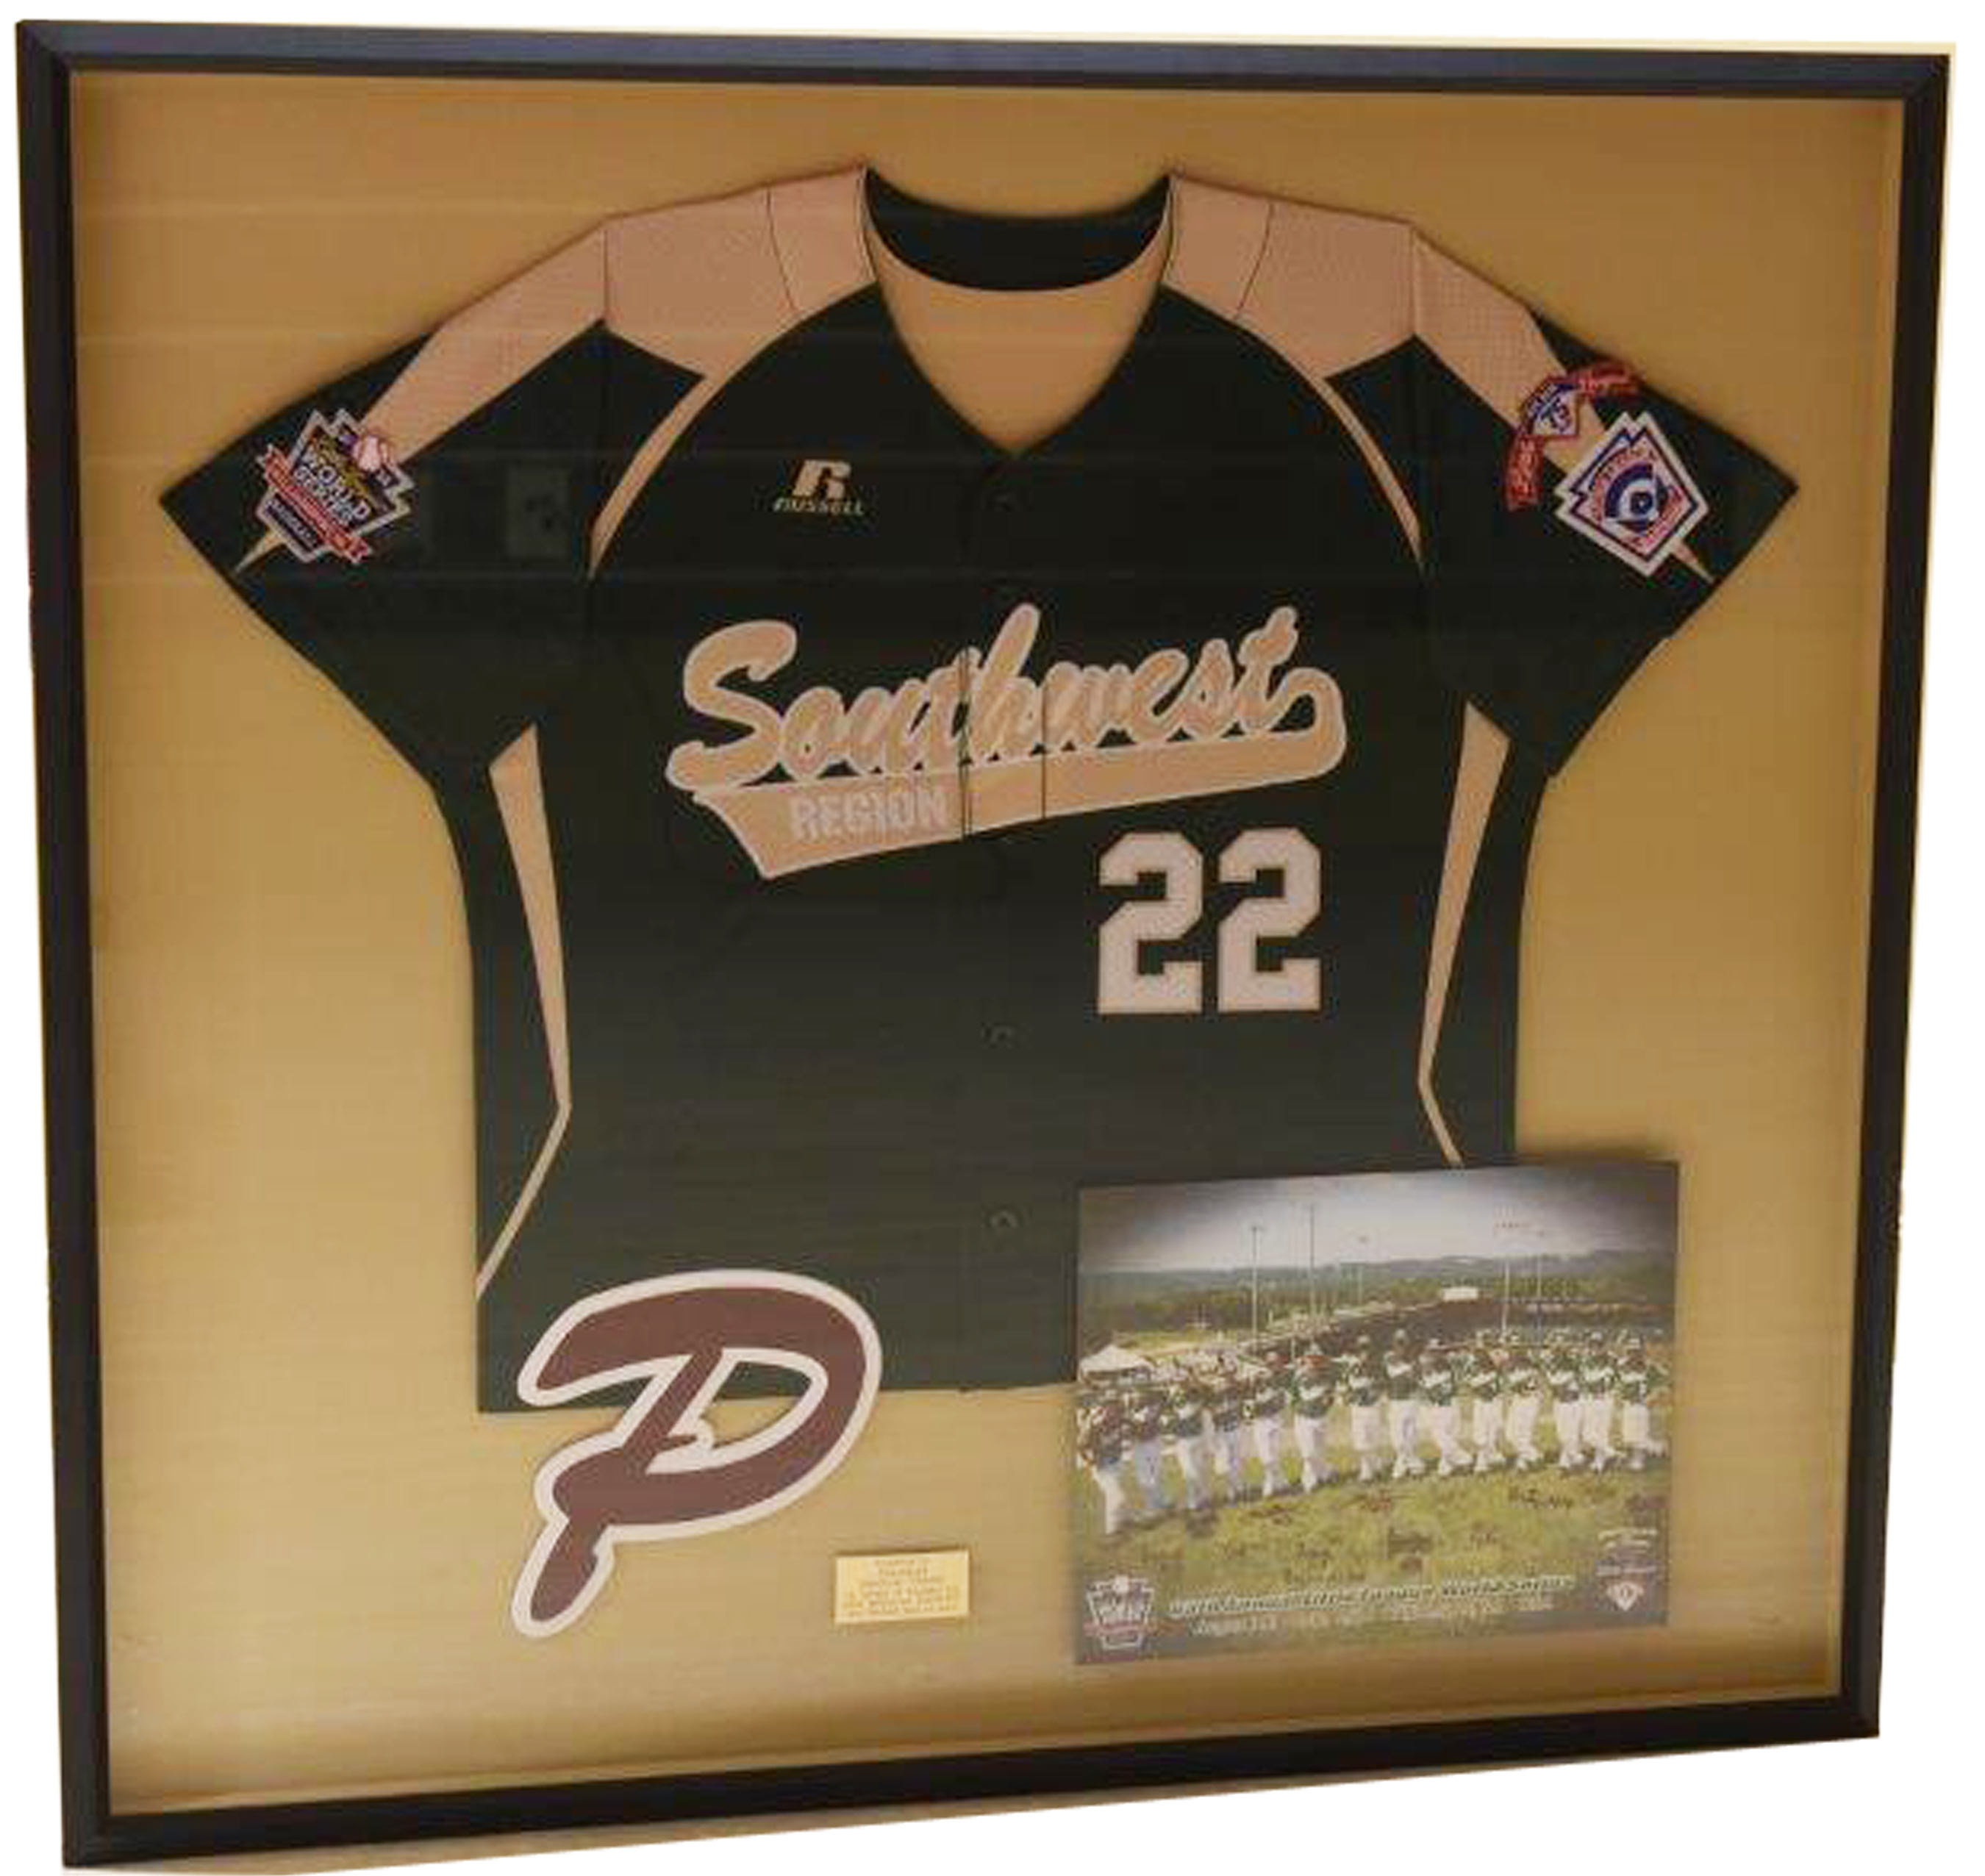 Pearland East Little League's shadow box donated to Pearland Medical Center